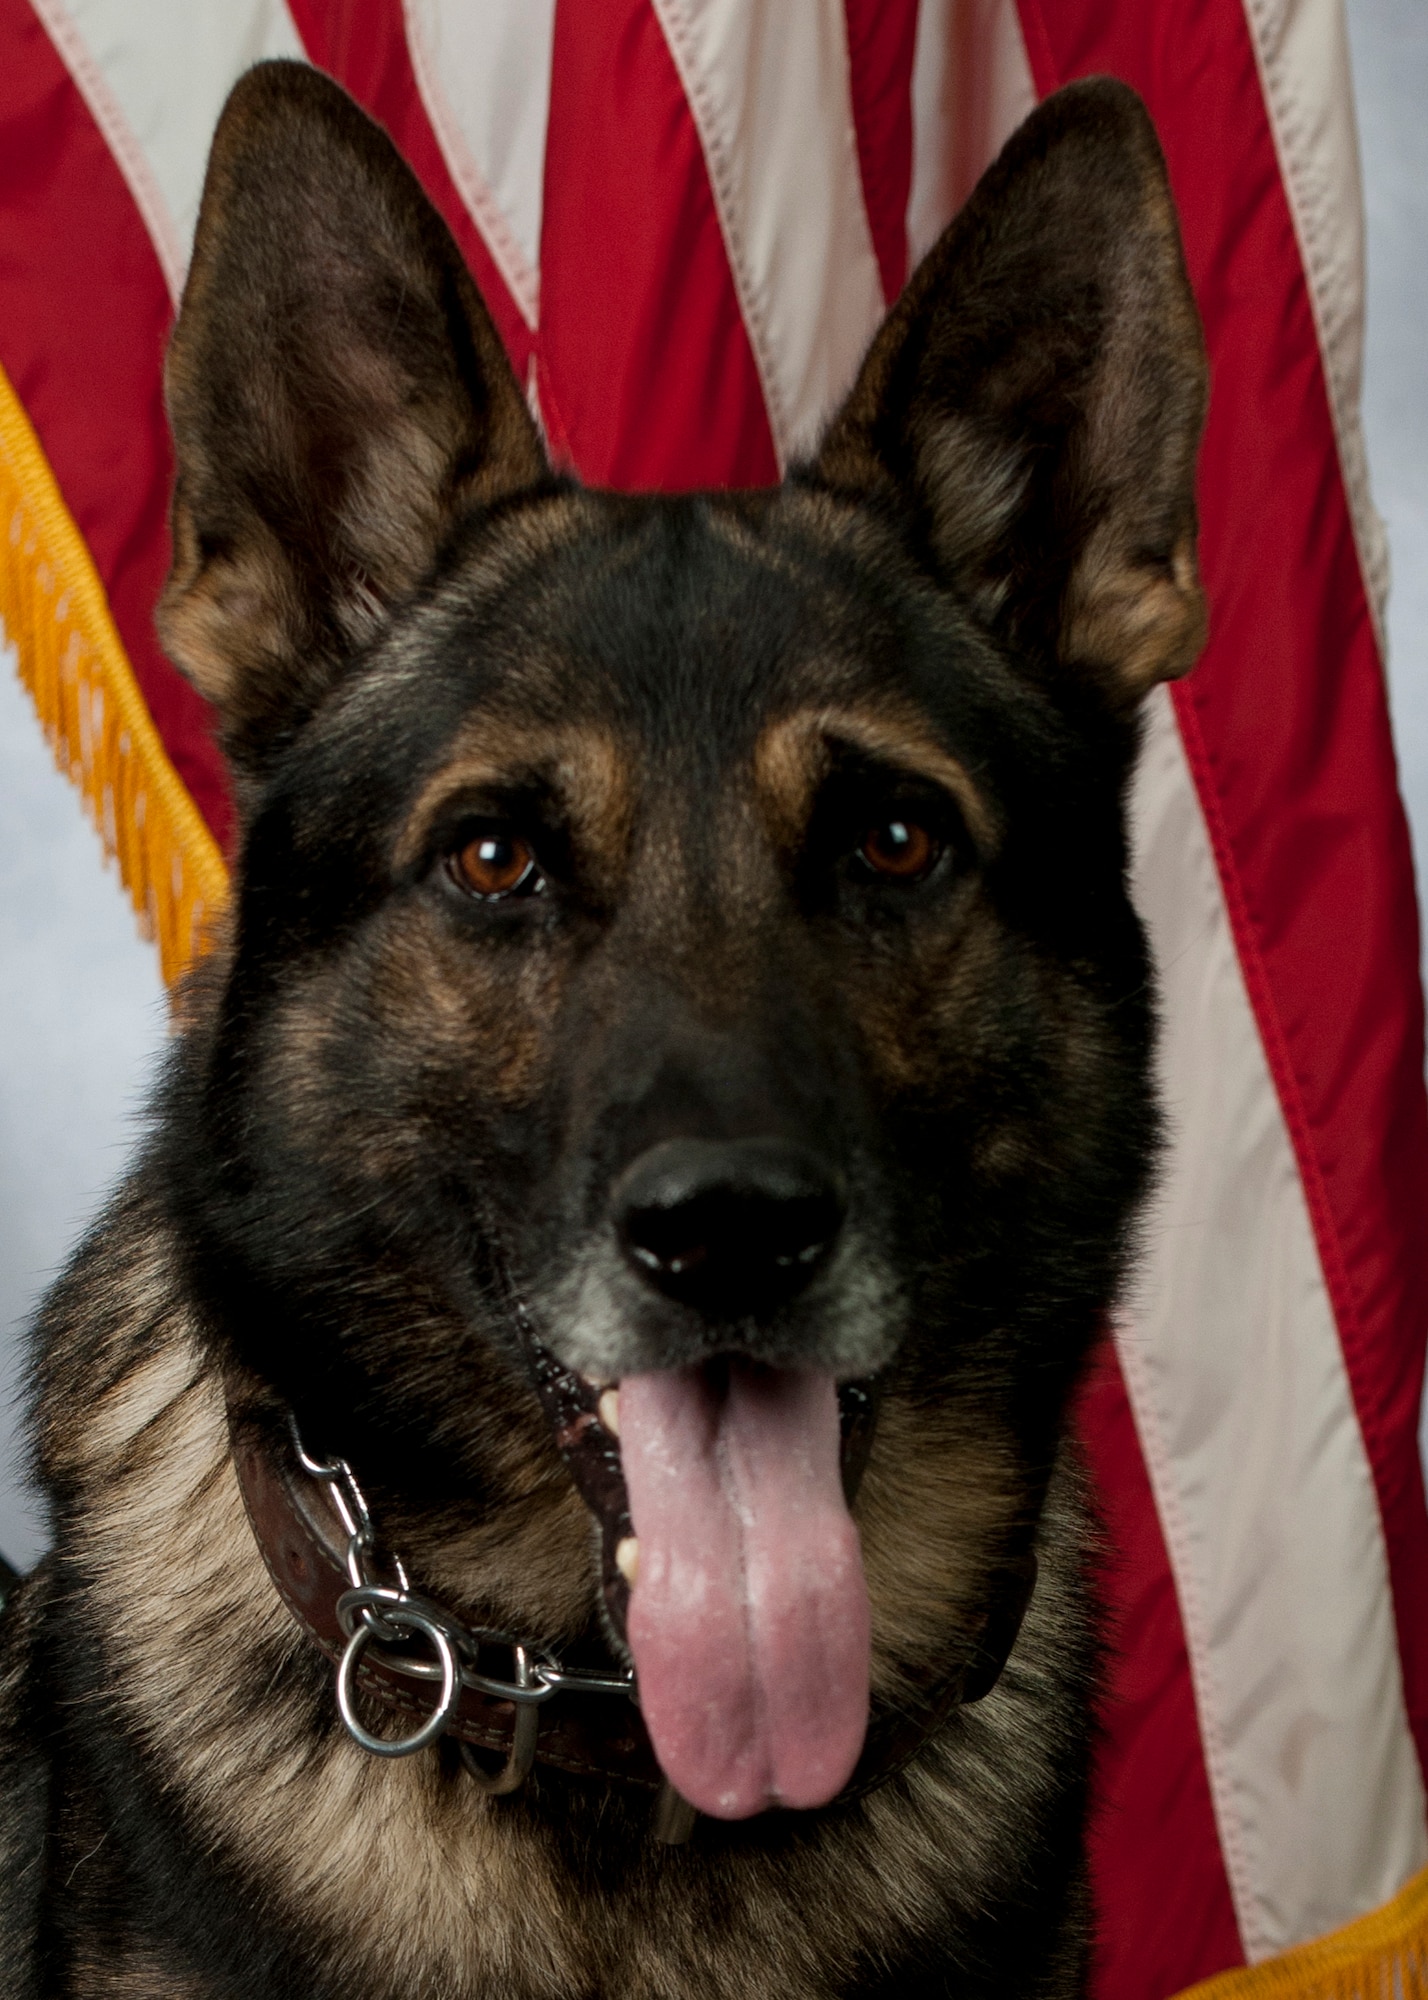 Roky, a five-year-old German Shepherd, military working dog, died after a demonstration at Holloman Air Force Base, N.M., Oct. 2. A memorial service was held at Holloman AFB base chapel Oct. 11. Roky served as a military working dog at Holloman AFB and in deployed locations. While deployed, Roky found more than 10,000 grams of illegal narcotics, conducted a thousand random anti-terrorism measures, and performed 400 hours of foot patrol. (U.S. Air Force photo by Airman 1st Class Daniel E. Liddicoet/Released)